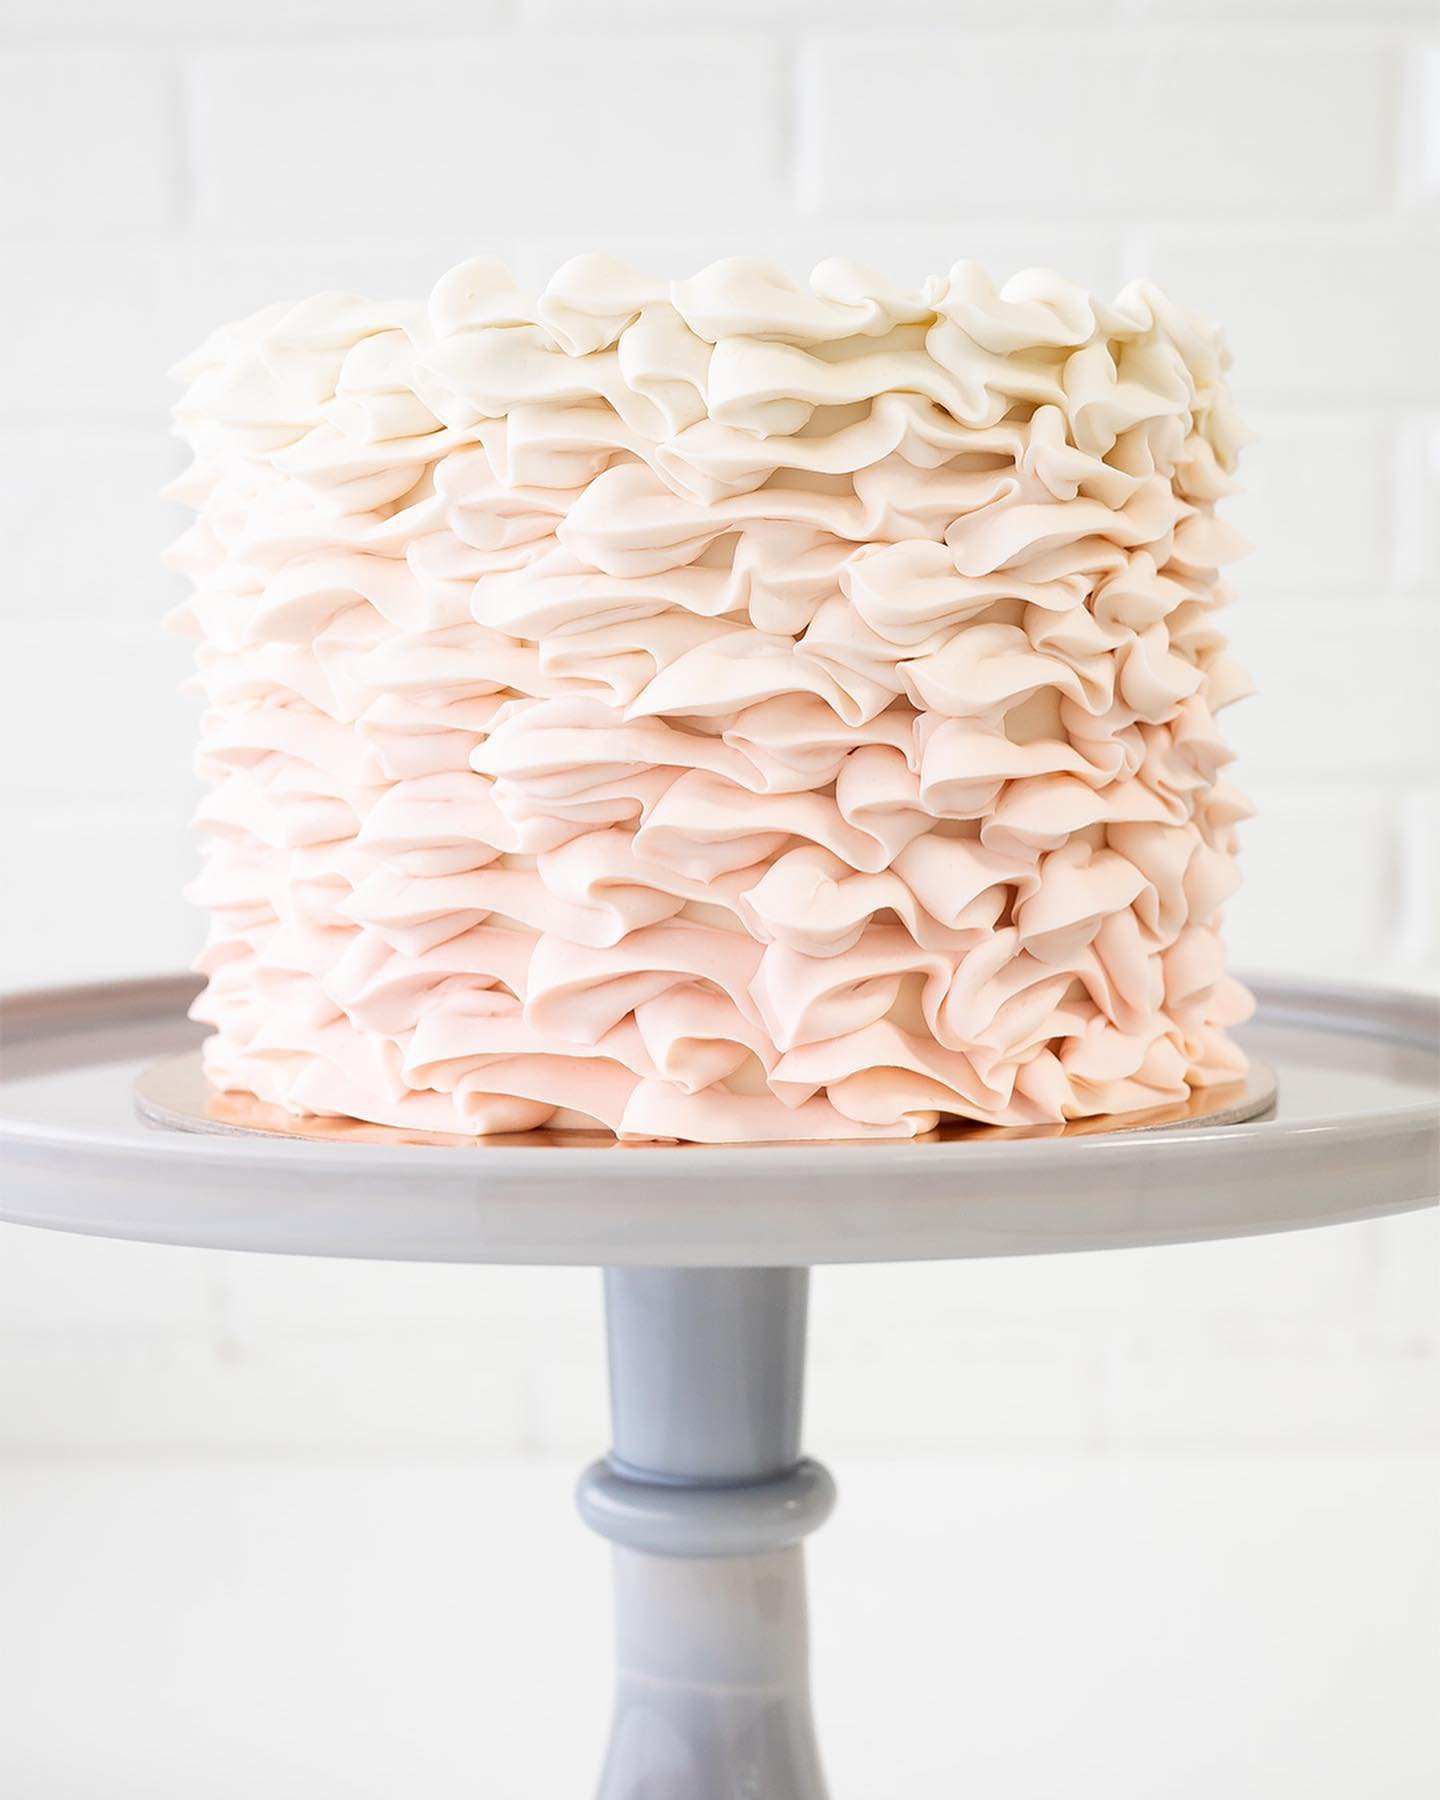 6&rdquo; Ruffle Cake in Blush-to-White ombr&eacute; with Blush icing message 🩷🤍🎂 See all our Made-to-Order Cake flavors, designs, and colors at the bio link.